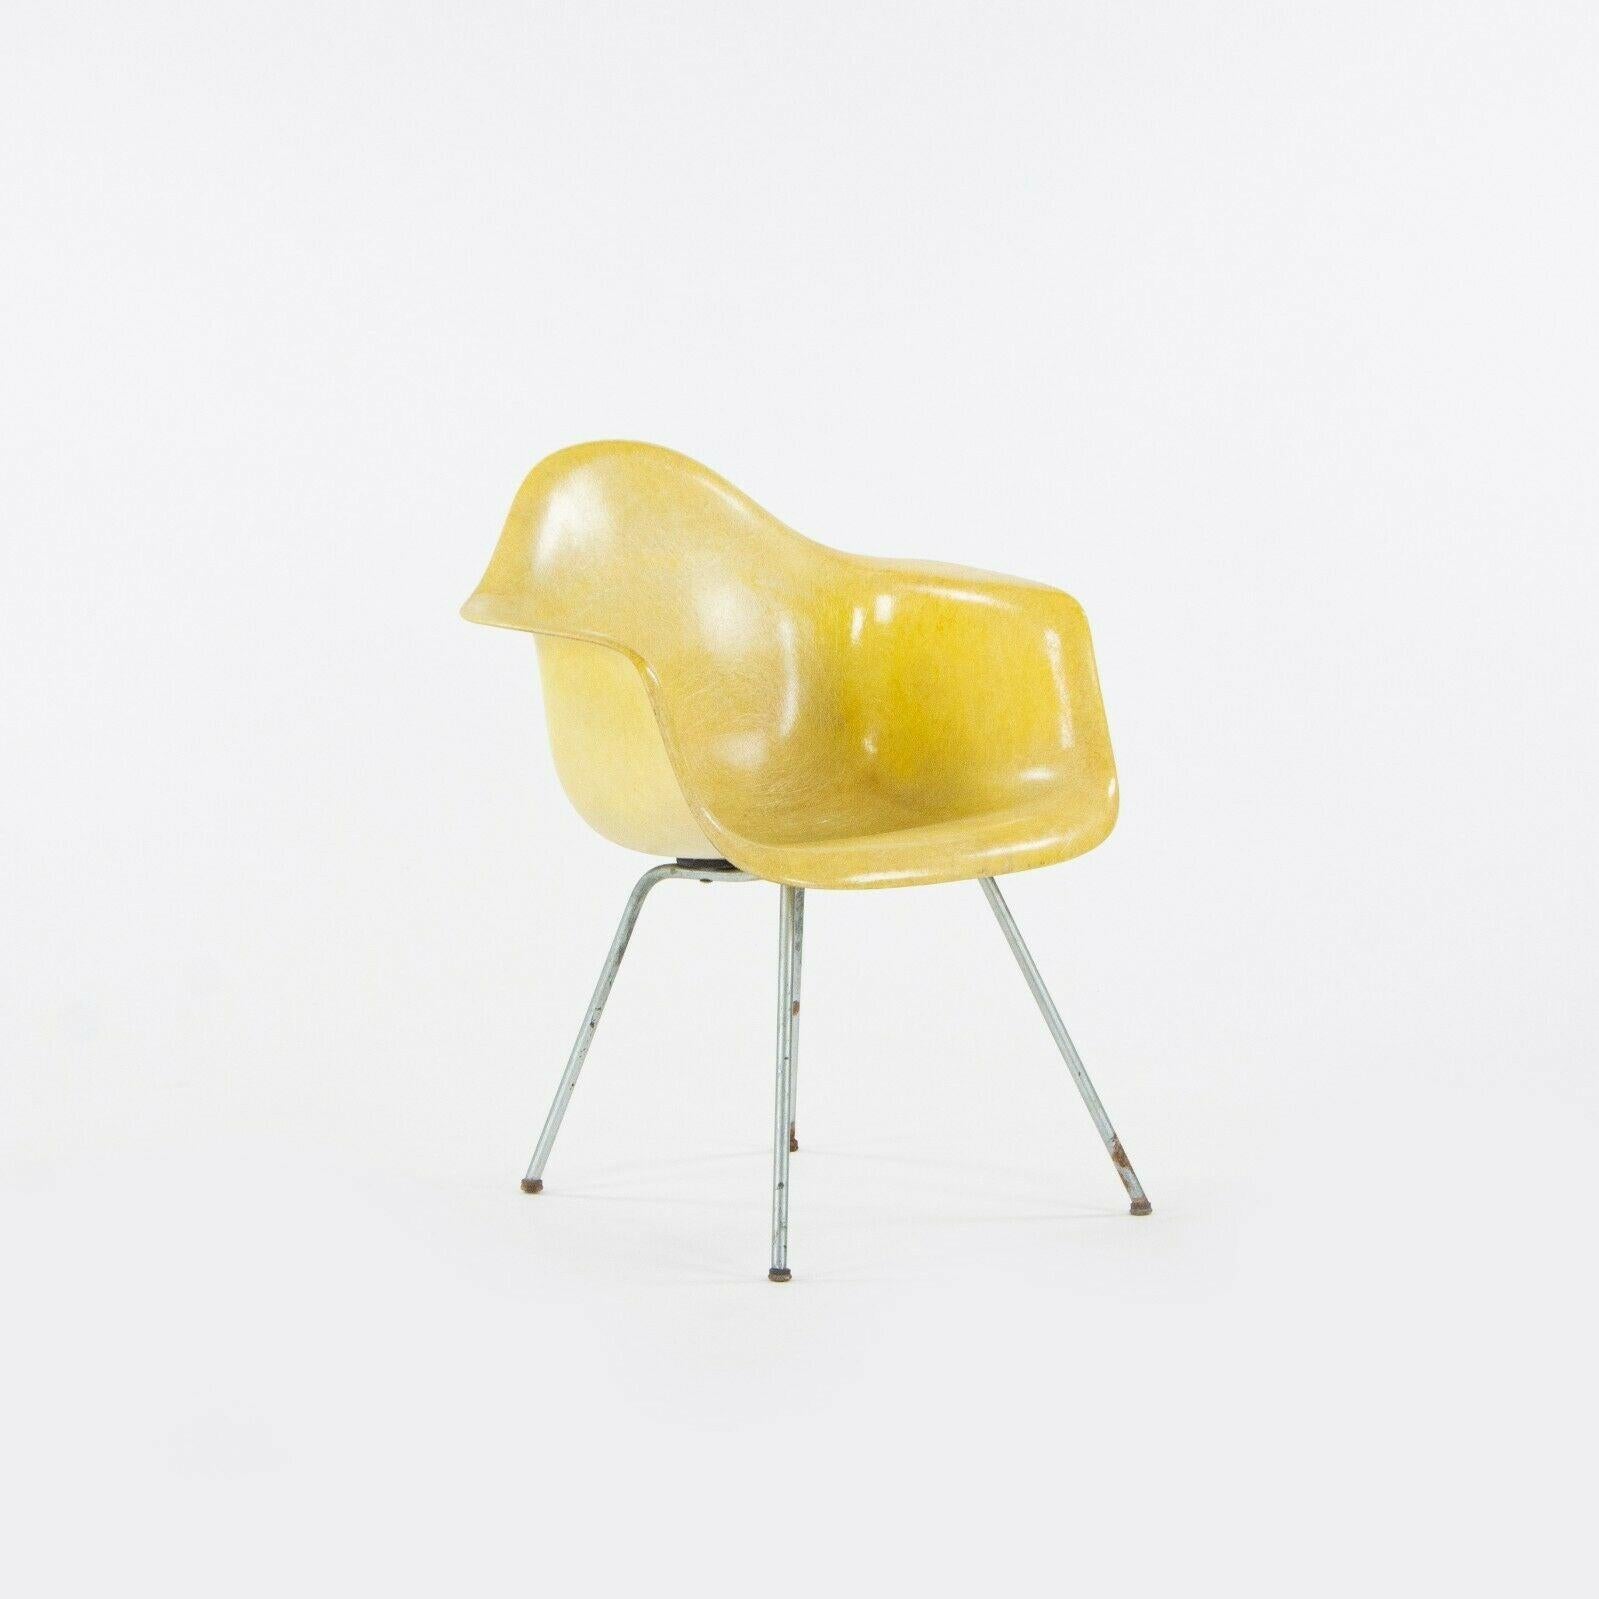 Listed for sale is a super rare and original set of four lemon yellow Herman Miller Eames fiberglass dining / side chairs, designed by Ray and Charles Eames. These chairs are the SAX standard chairs, which sit slightly lower than the DAX (slightly